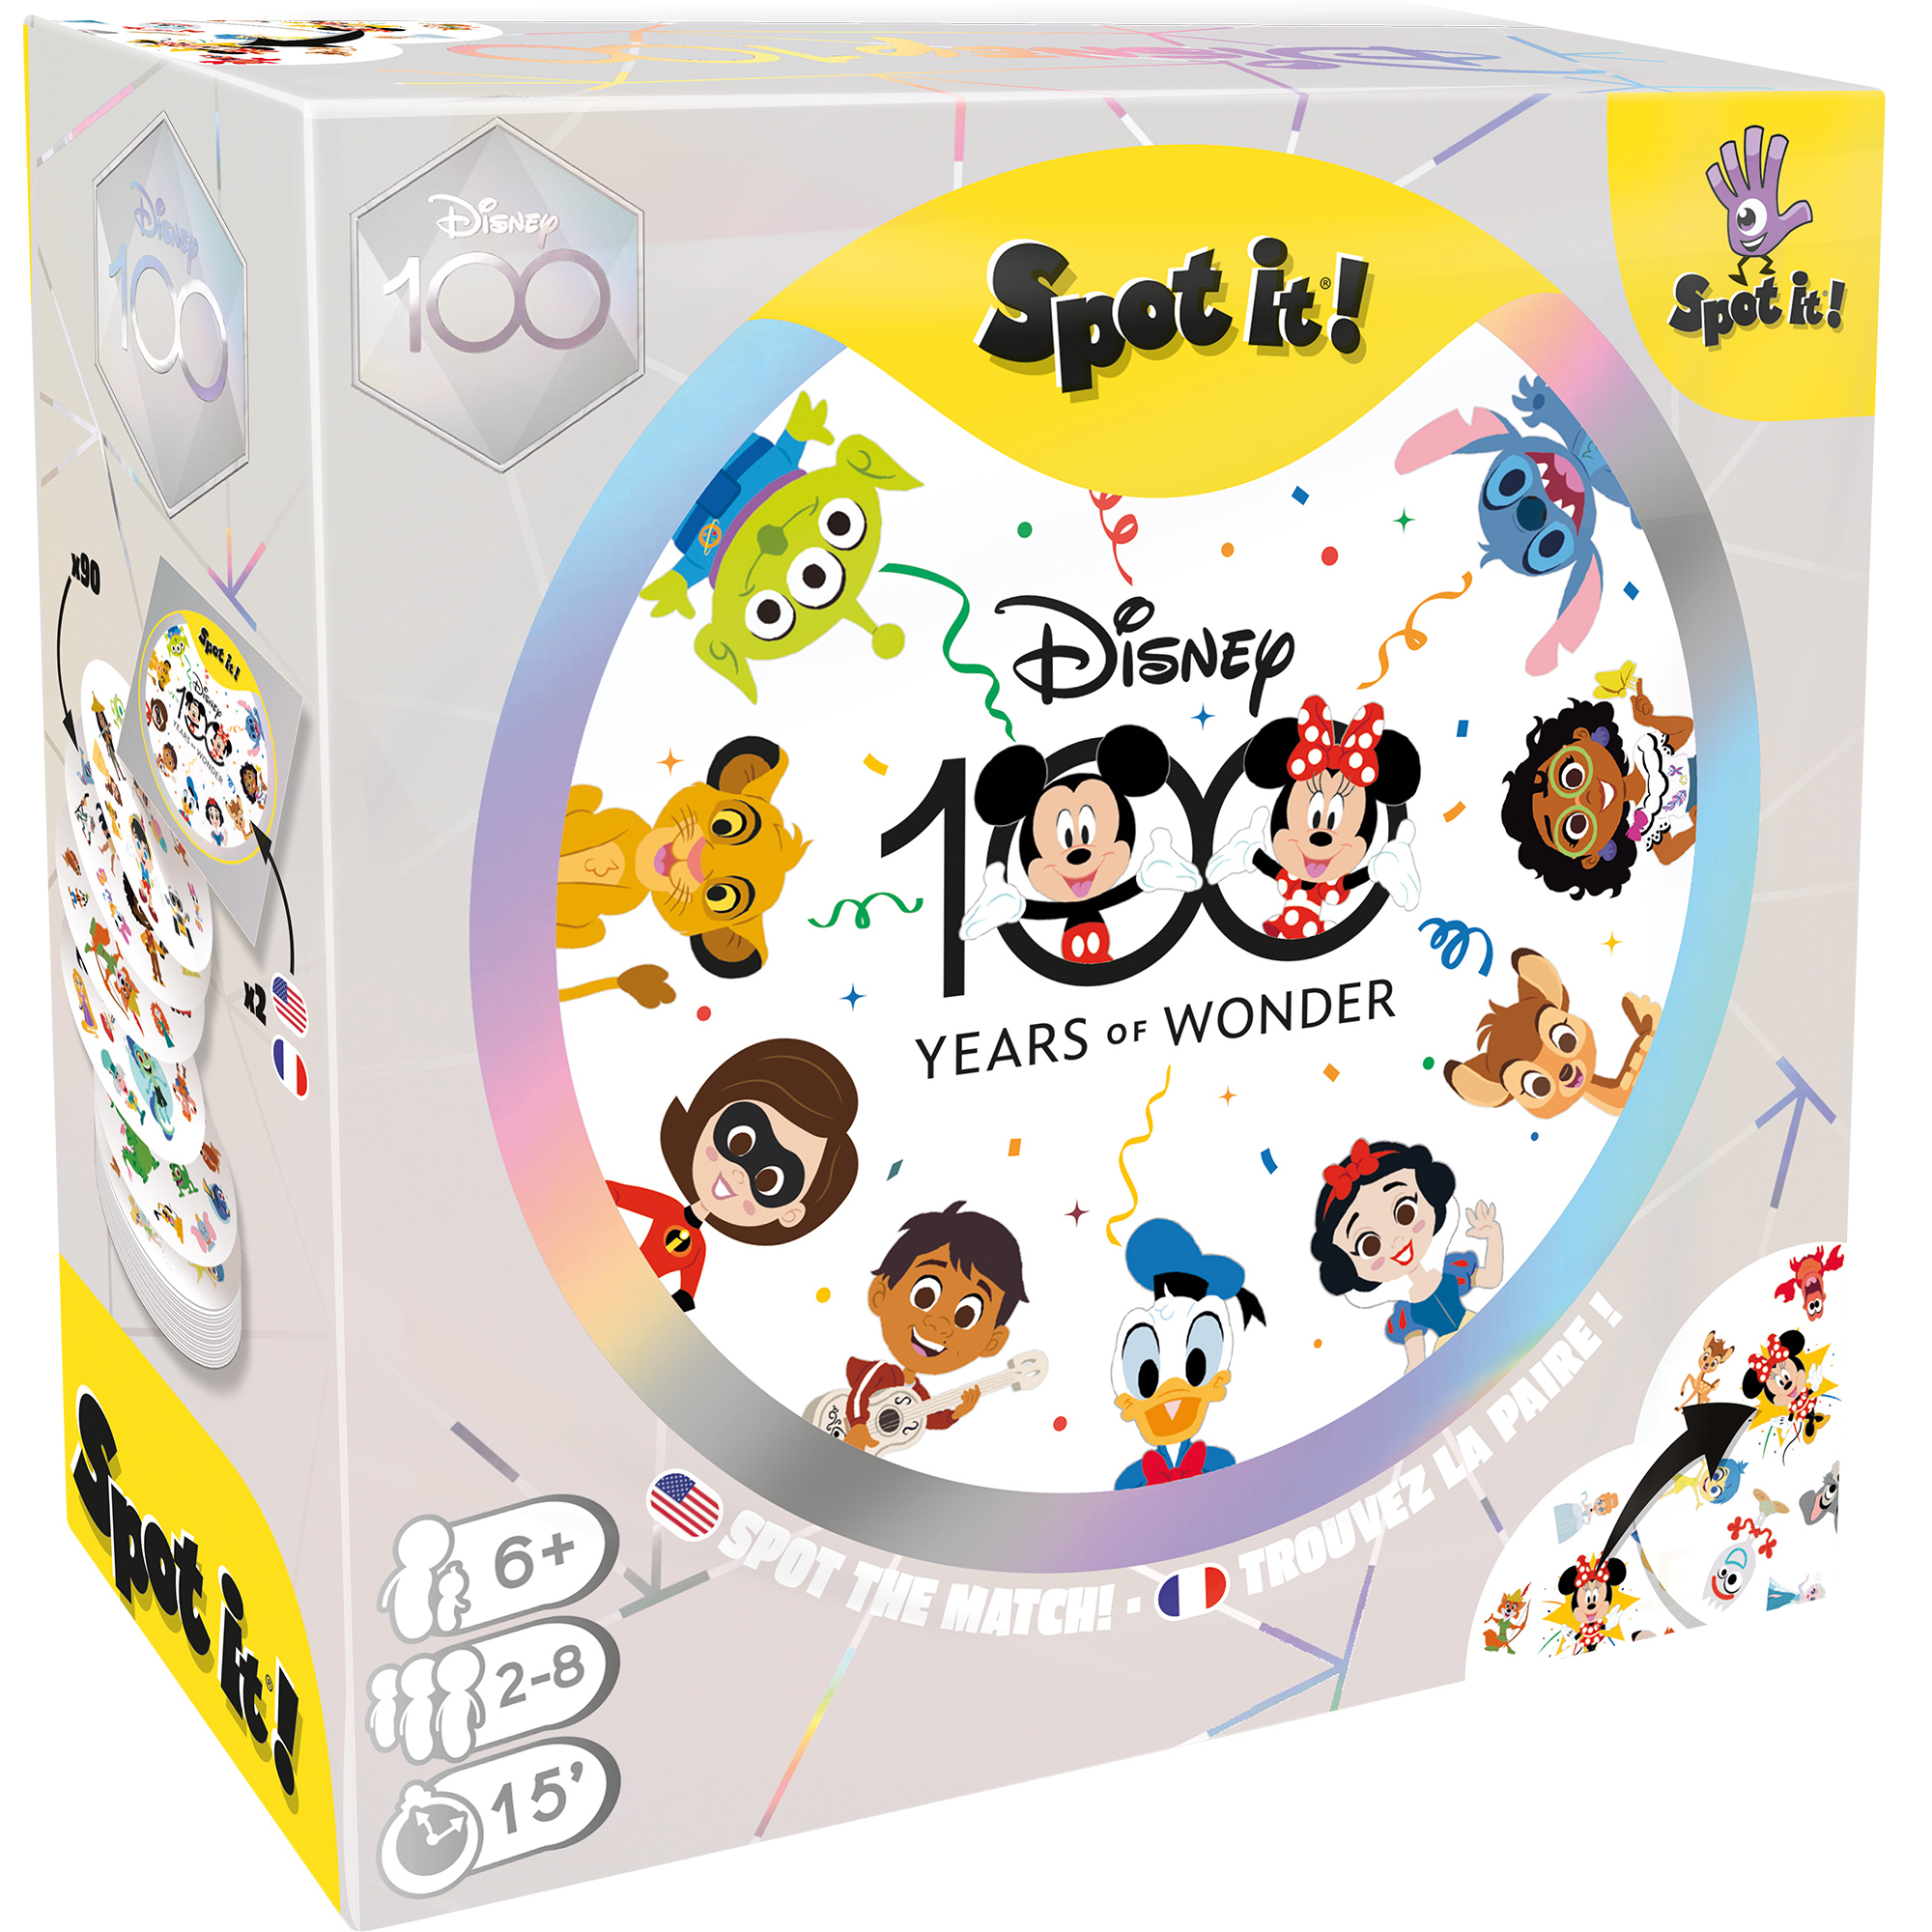 Spot It Disney 100th Anniversary Family Card Game for Ages 6 and up, from Asmodee - image 2 of 5